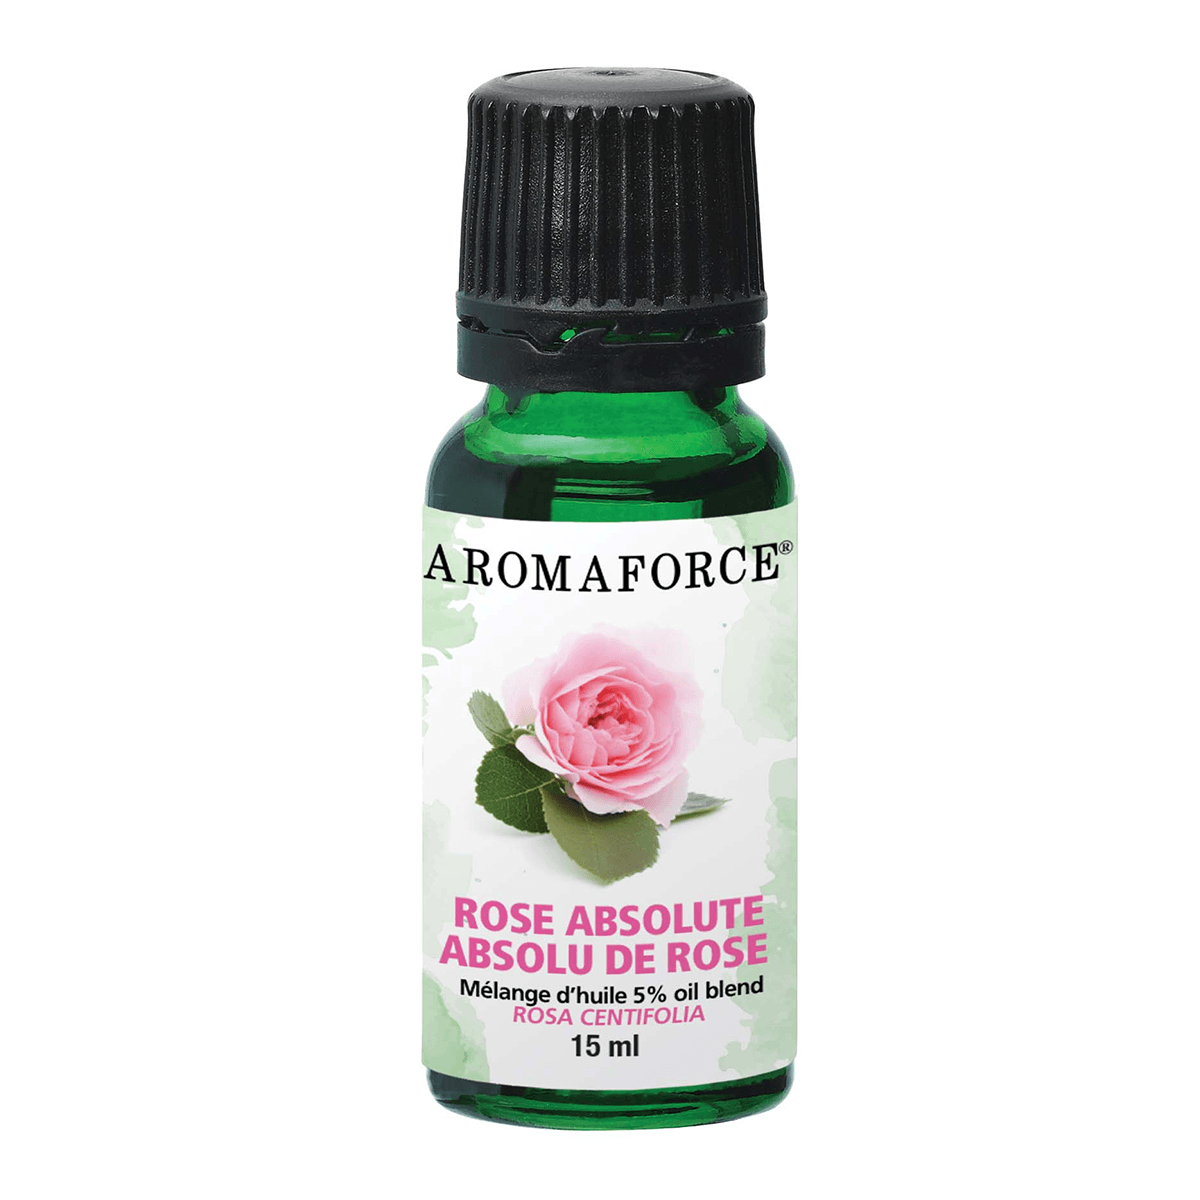 Aromaforce Essential Oil Rose Absolute 15mL Essential Oils at Village Vitamin Store